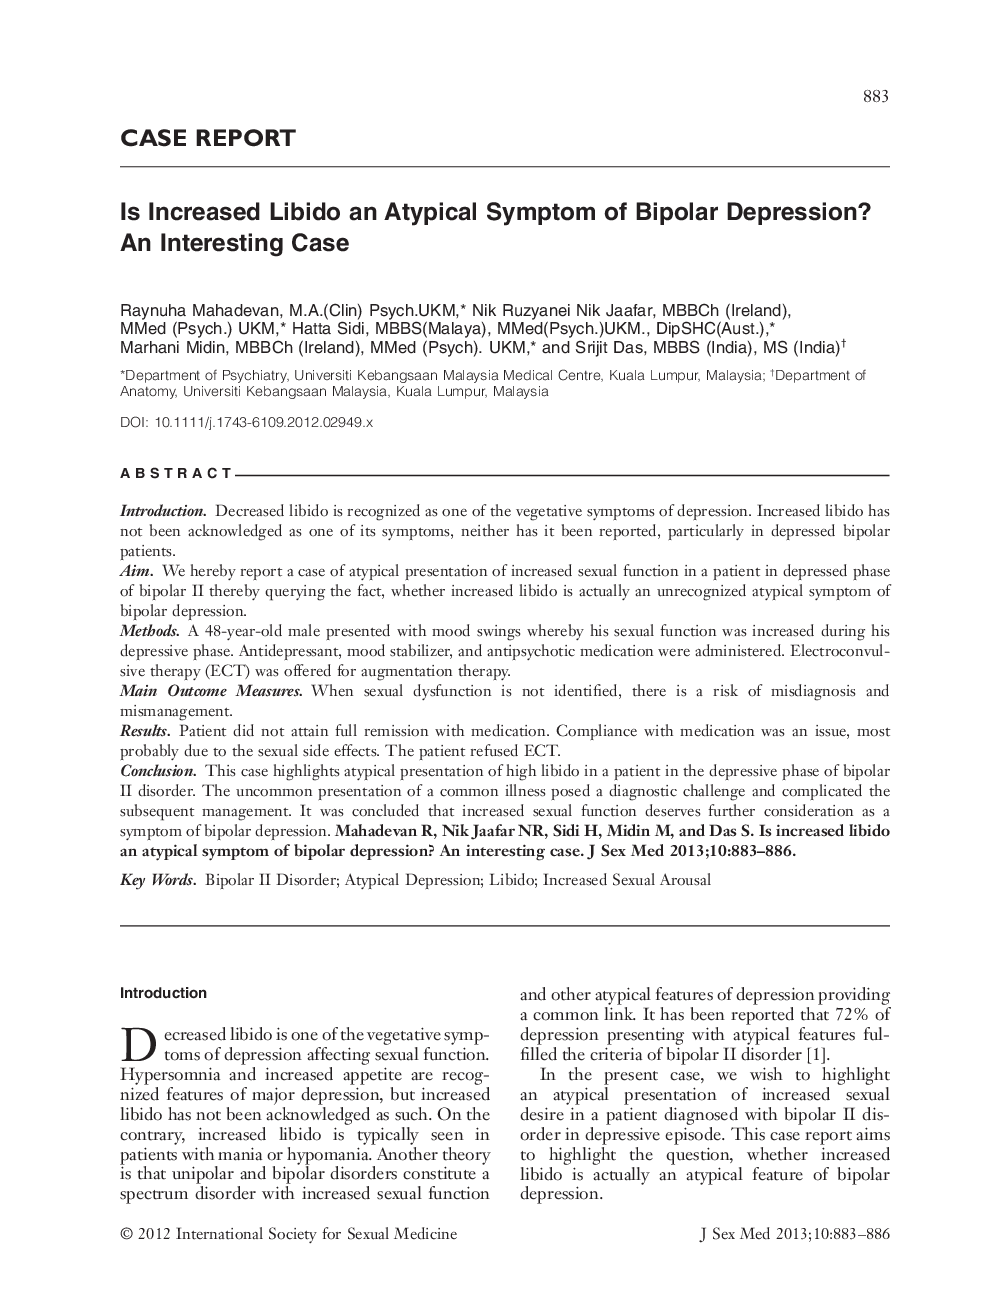 Is Increased Libido an Atypical Symptom of Bipolar Depression? An Interesting Case